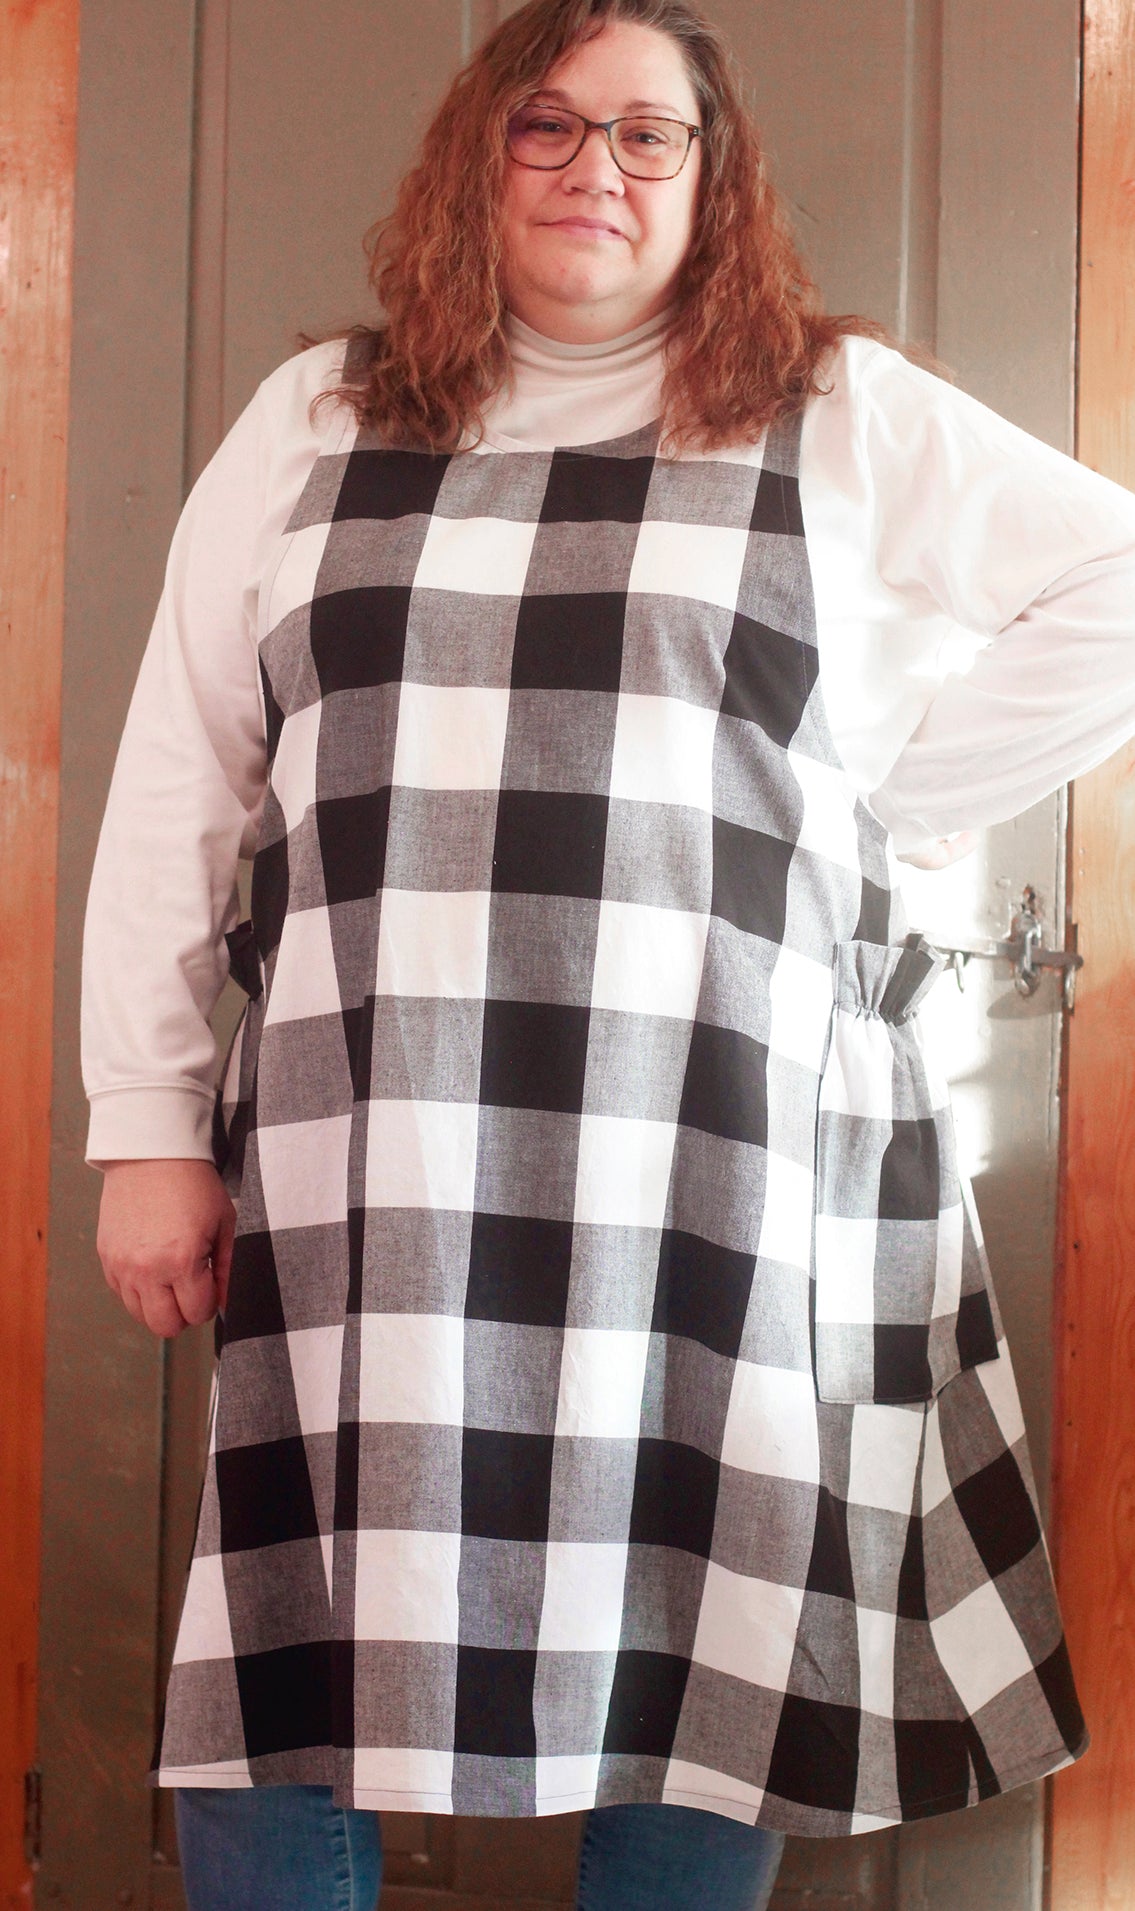 XS-5X No Ties Crossback Apron in 100% Cotton Homespun in Farmhouse Check - Front View 2